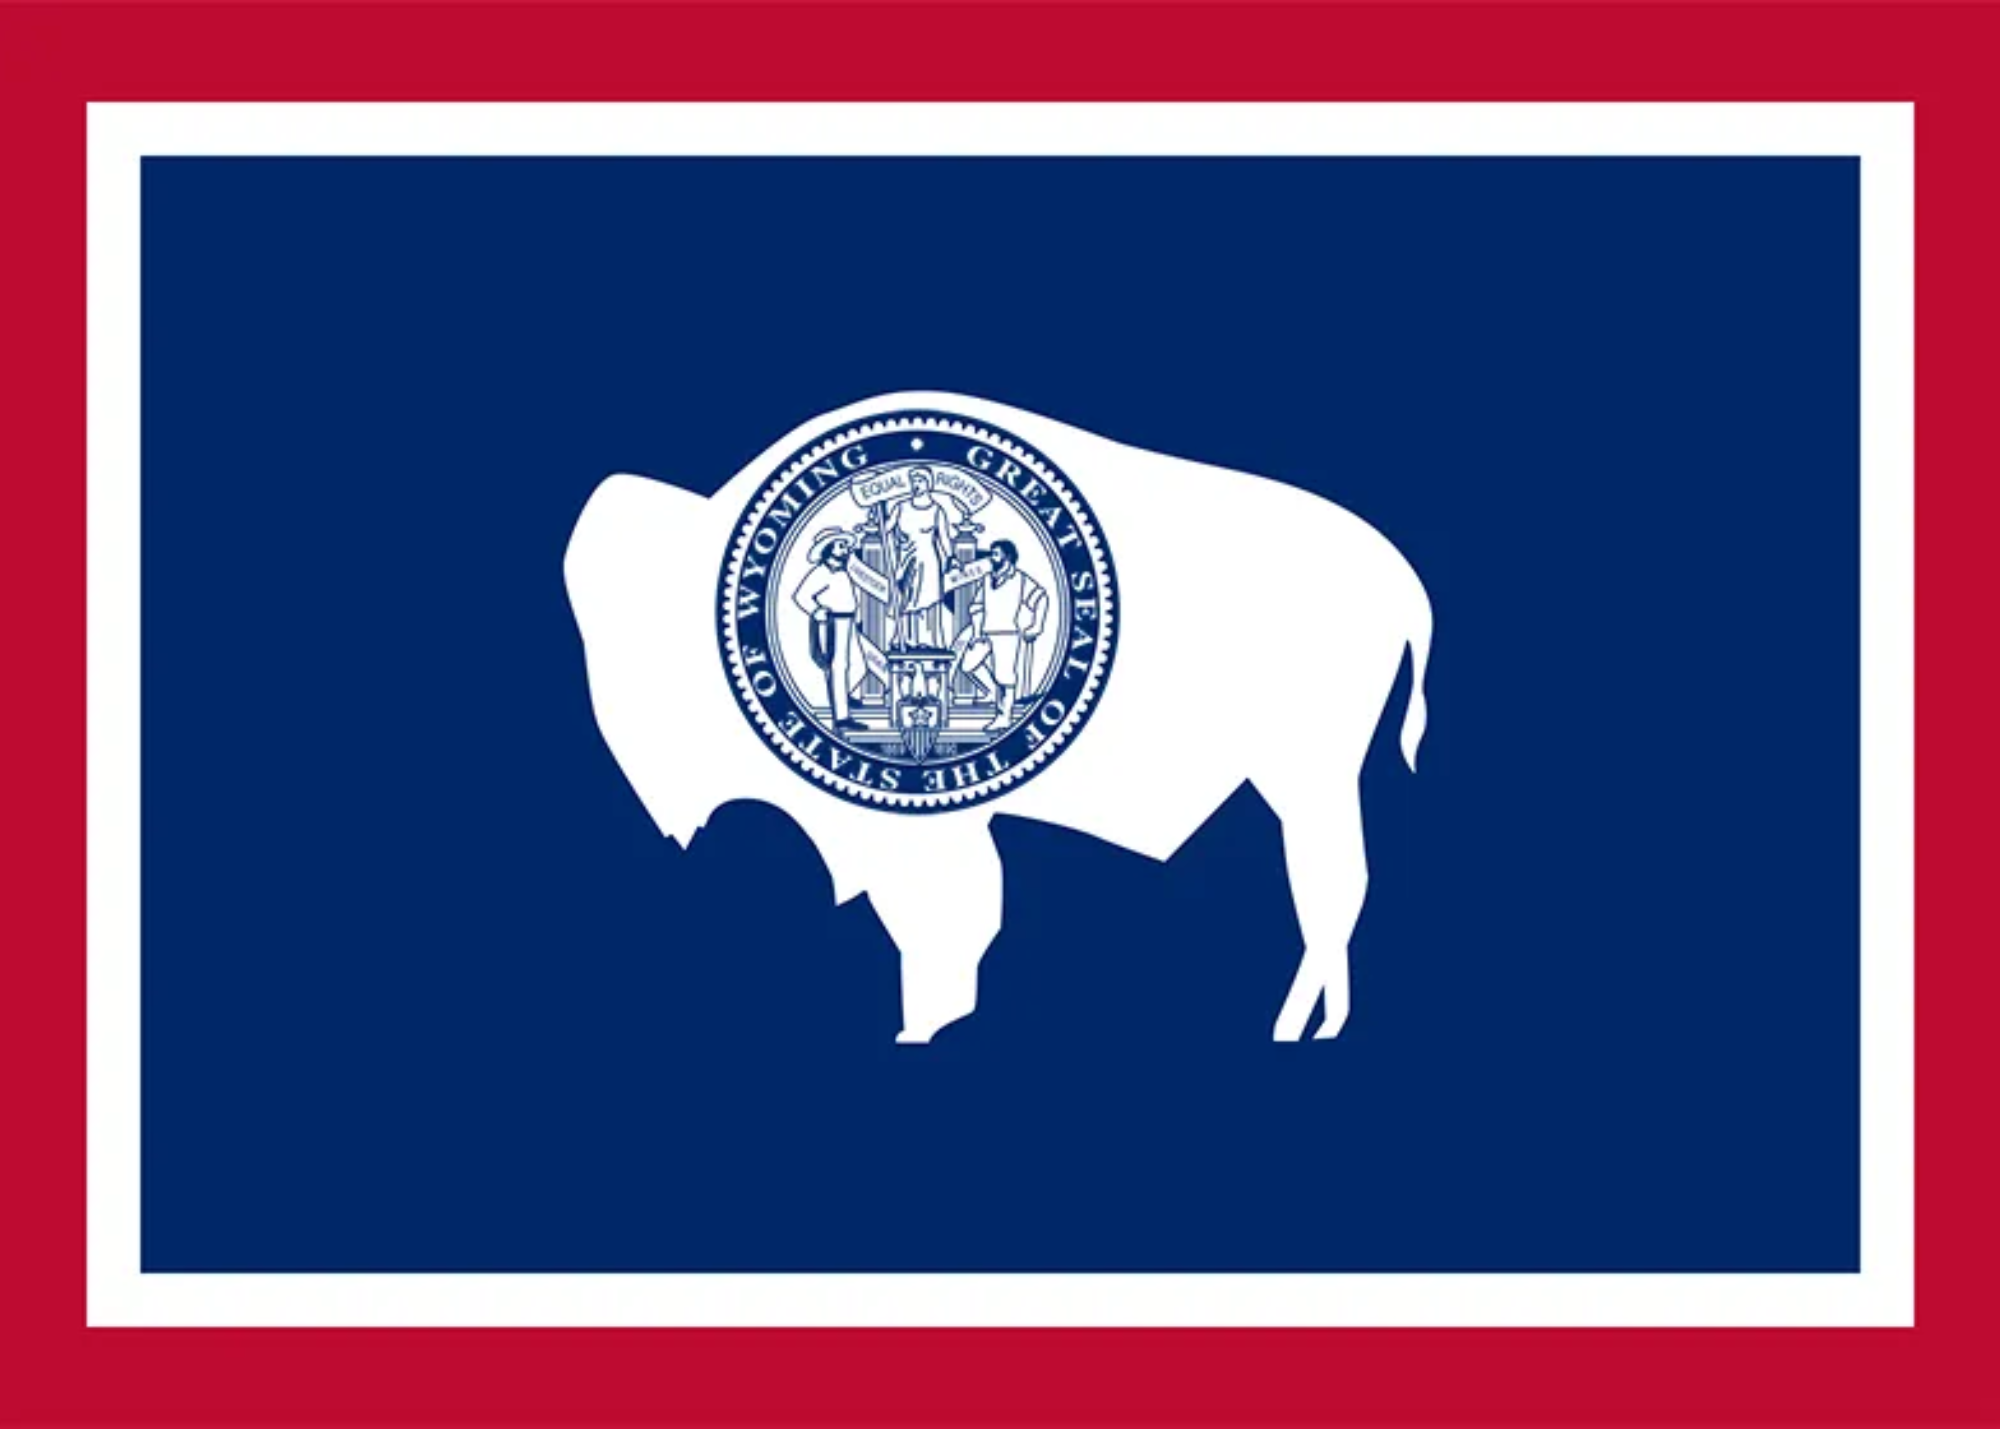 Wyoming's state flag has red and white borders and a white silhouette of a bison in the center